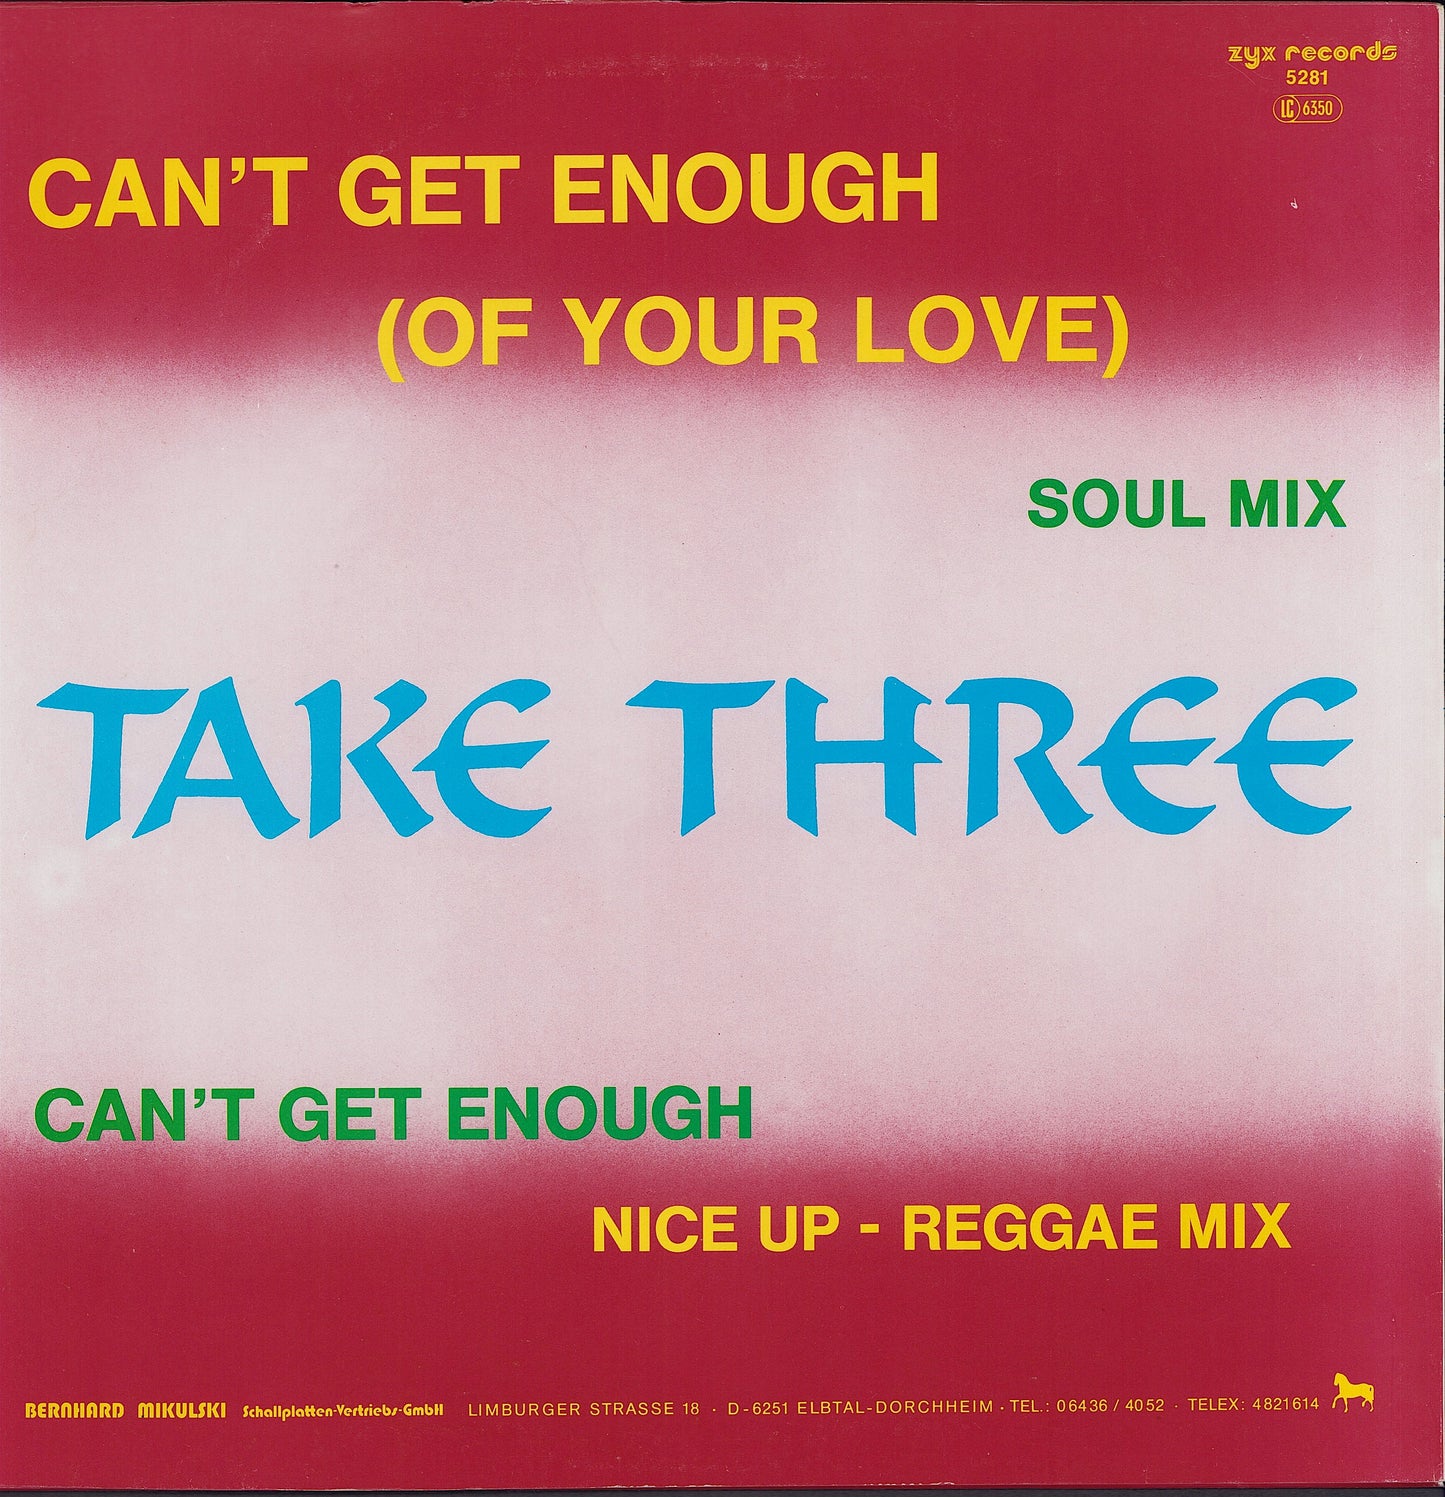 Take Three ‎- Can't Get Enough Of Your Love Vinyl 12"